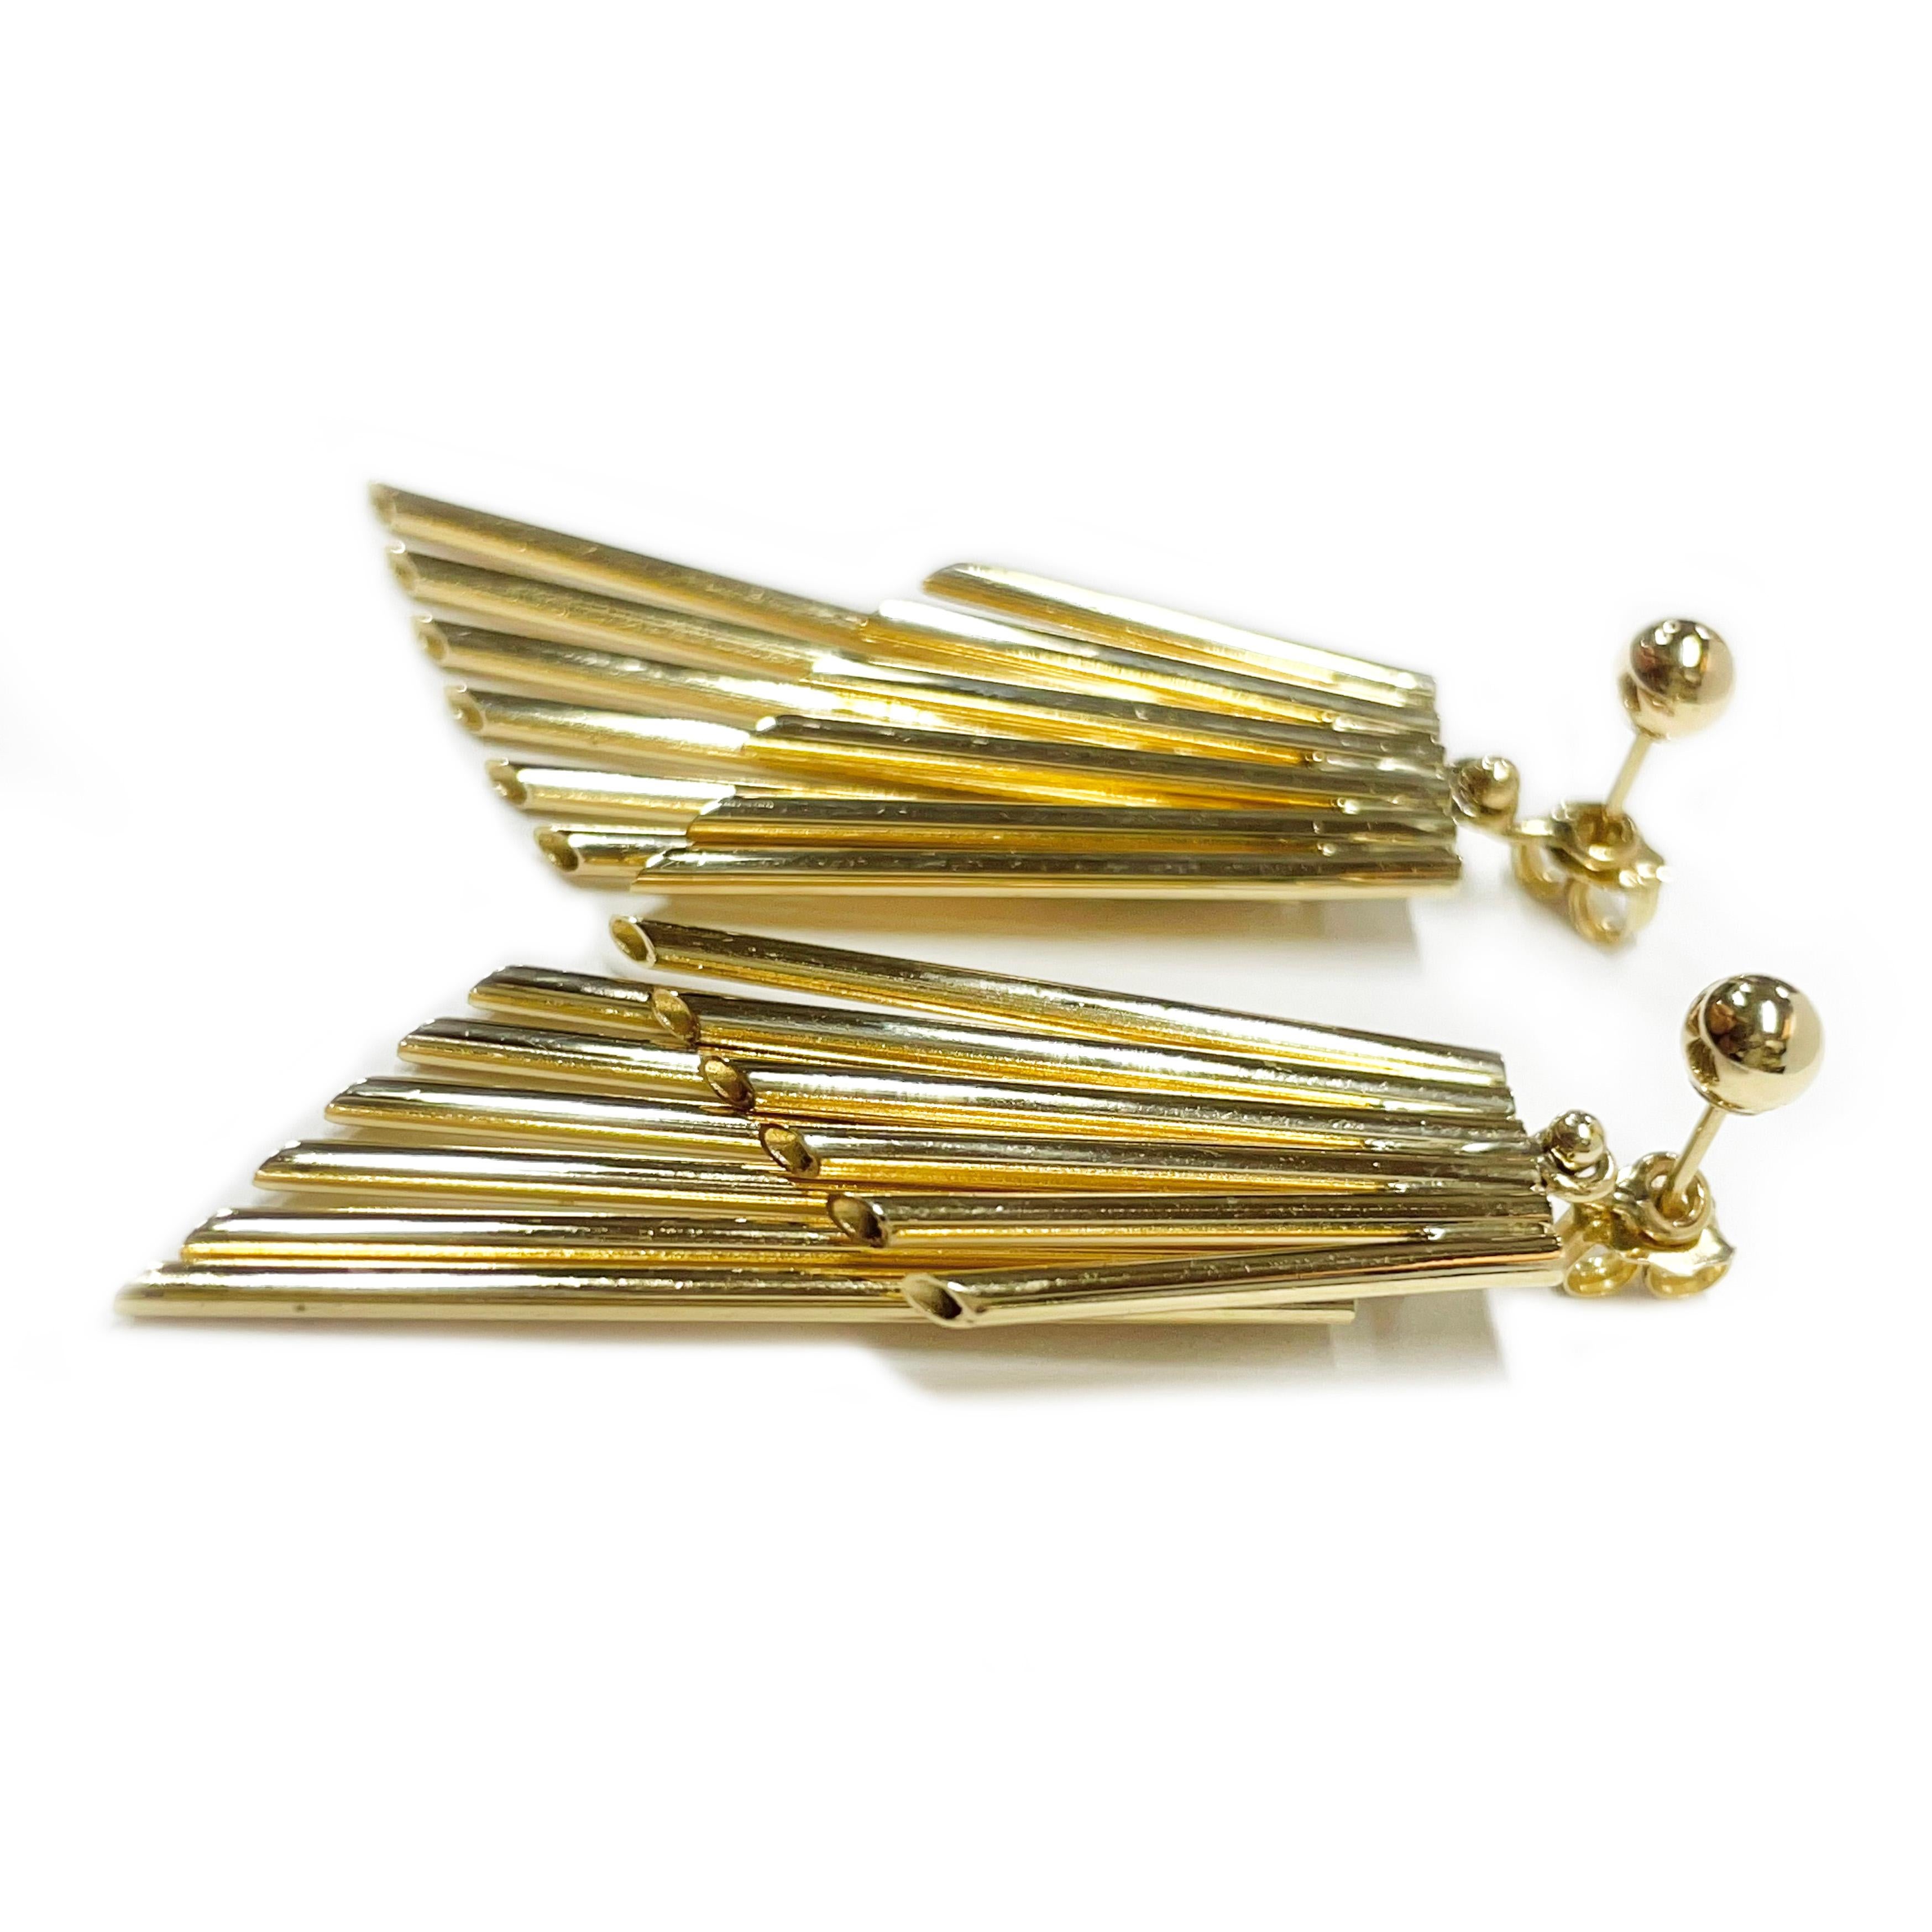 14 Karat Yellow Gold Ball Studs Jacket Earrings. These earrings can be worn as just 4mm ball studs or with the double layer of musical pipes/tube jackets. Each portion contains six hollow tubes resembling musical pipes. The earrings measure 1.78